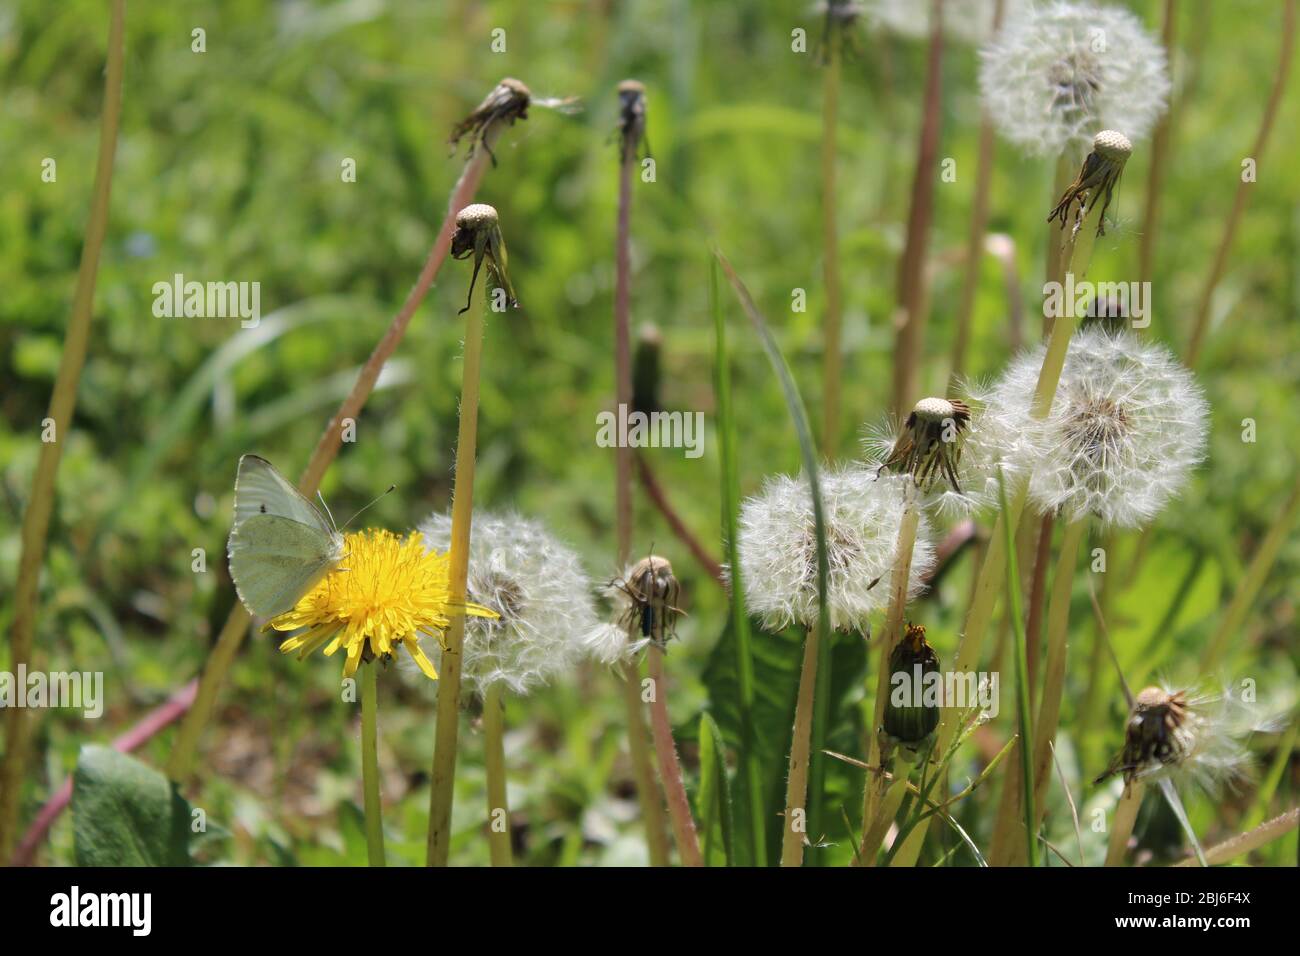 cabbage white butterfly on dandelion surrounded by dandelion clocks Stock Photo